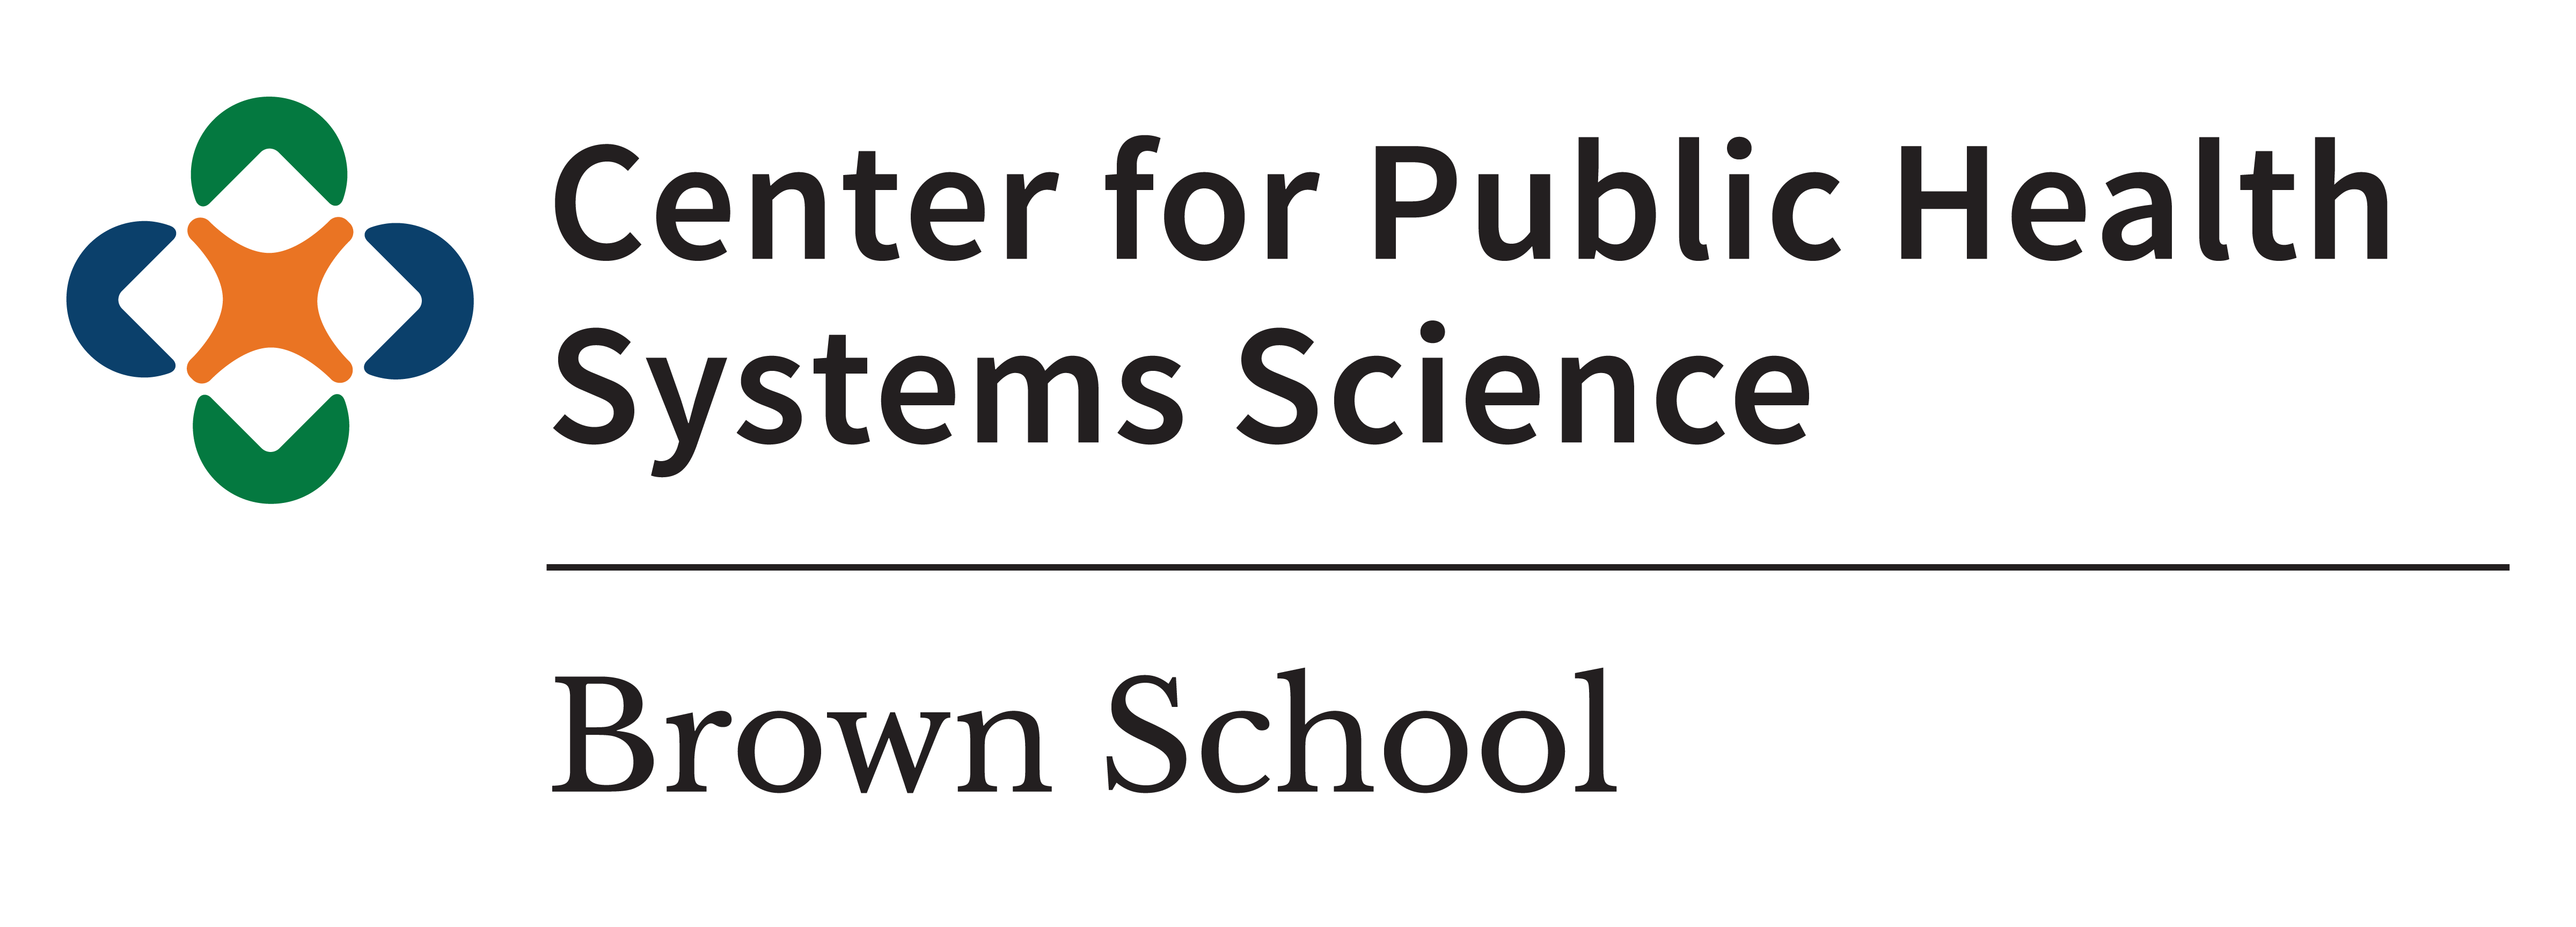 Center for Public Health Systems Science at the Brown School at Washington University in St. Louis